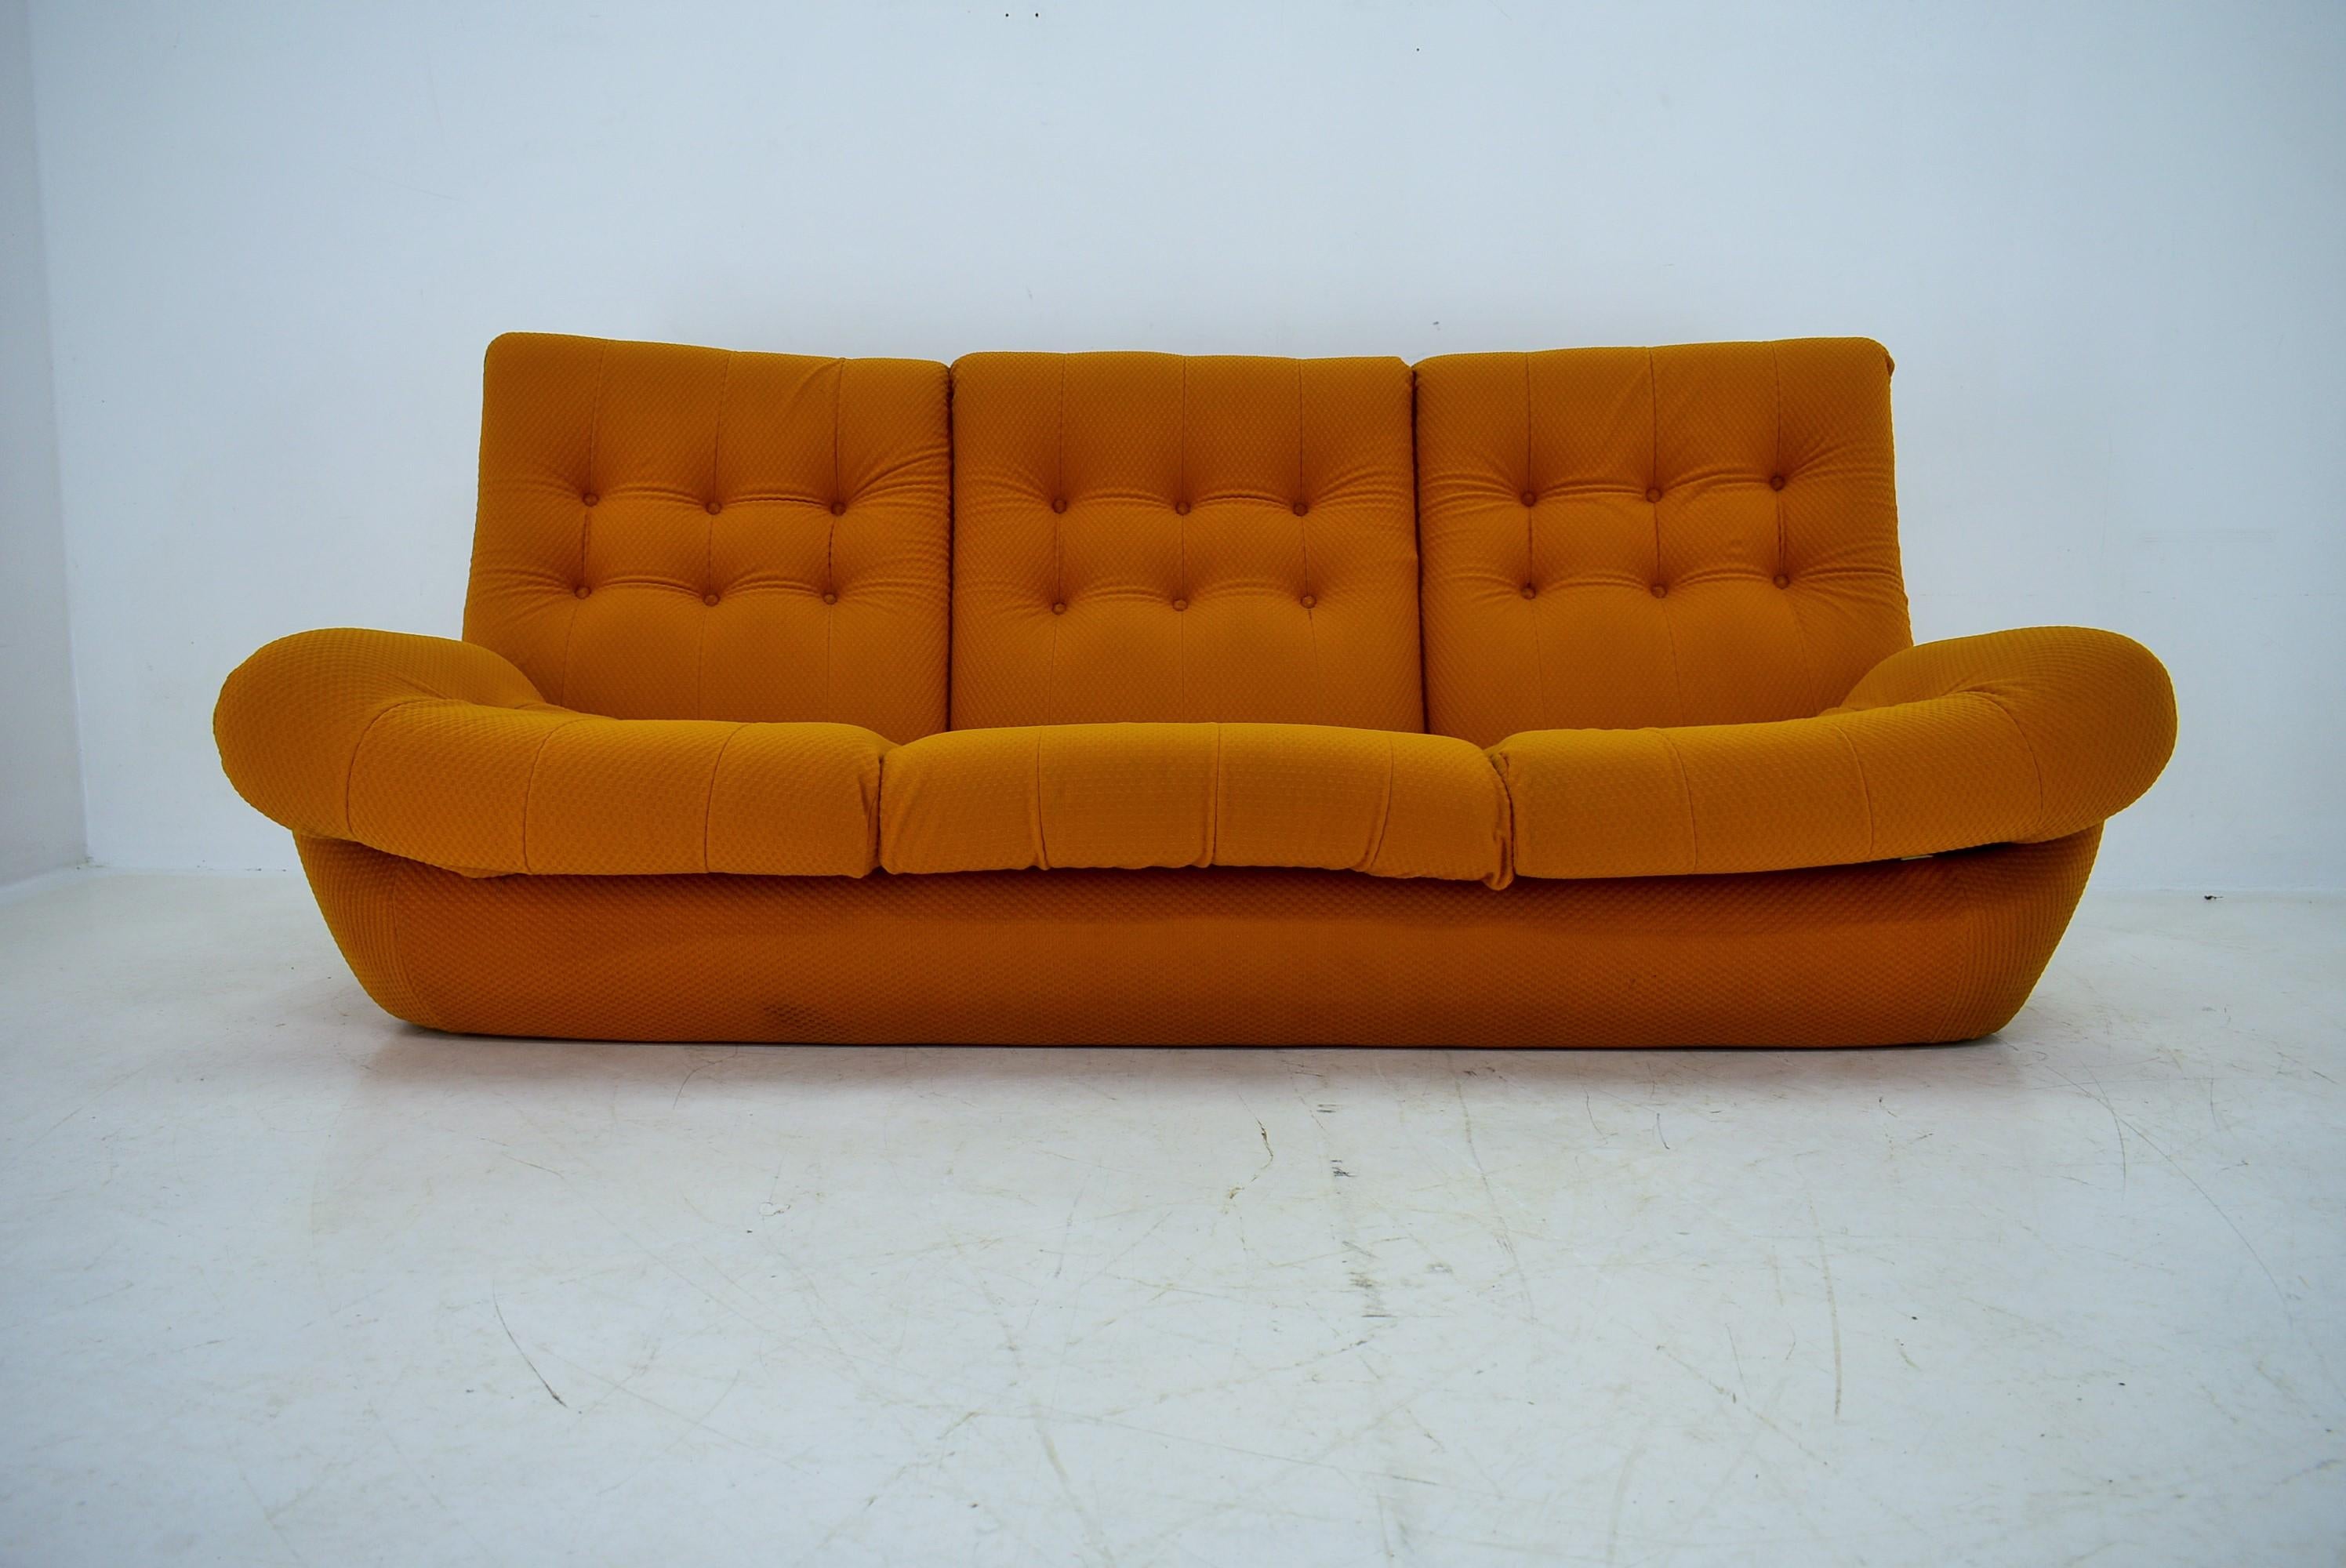 Atlantis sofa from the 1960s, produced in Czech Republic - at the moment they are unique. Due to their dimensions, they perfectly blend in even in small apartments .   Space-saving piece of furniture. We can prepare this sofa with two armchairs as a